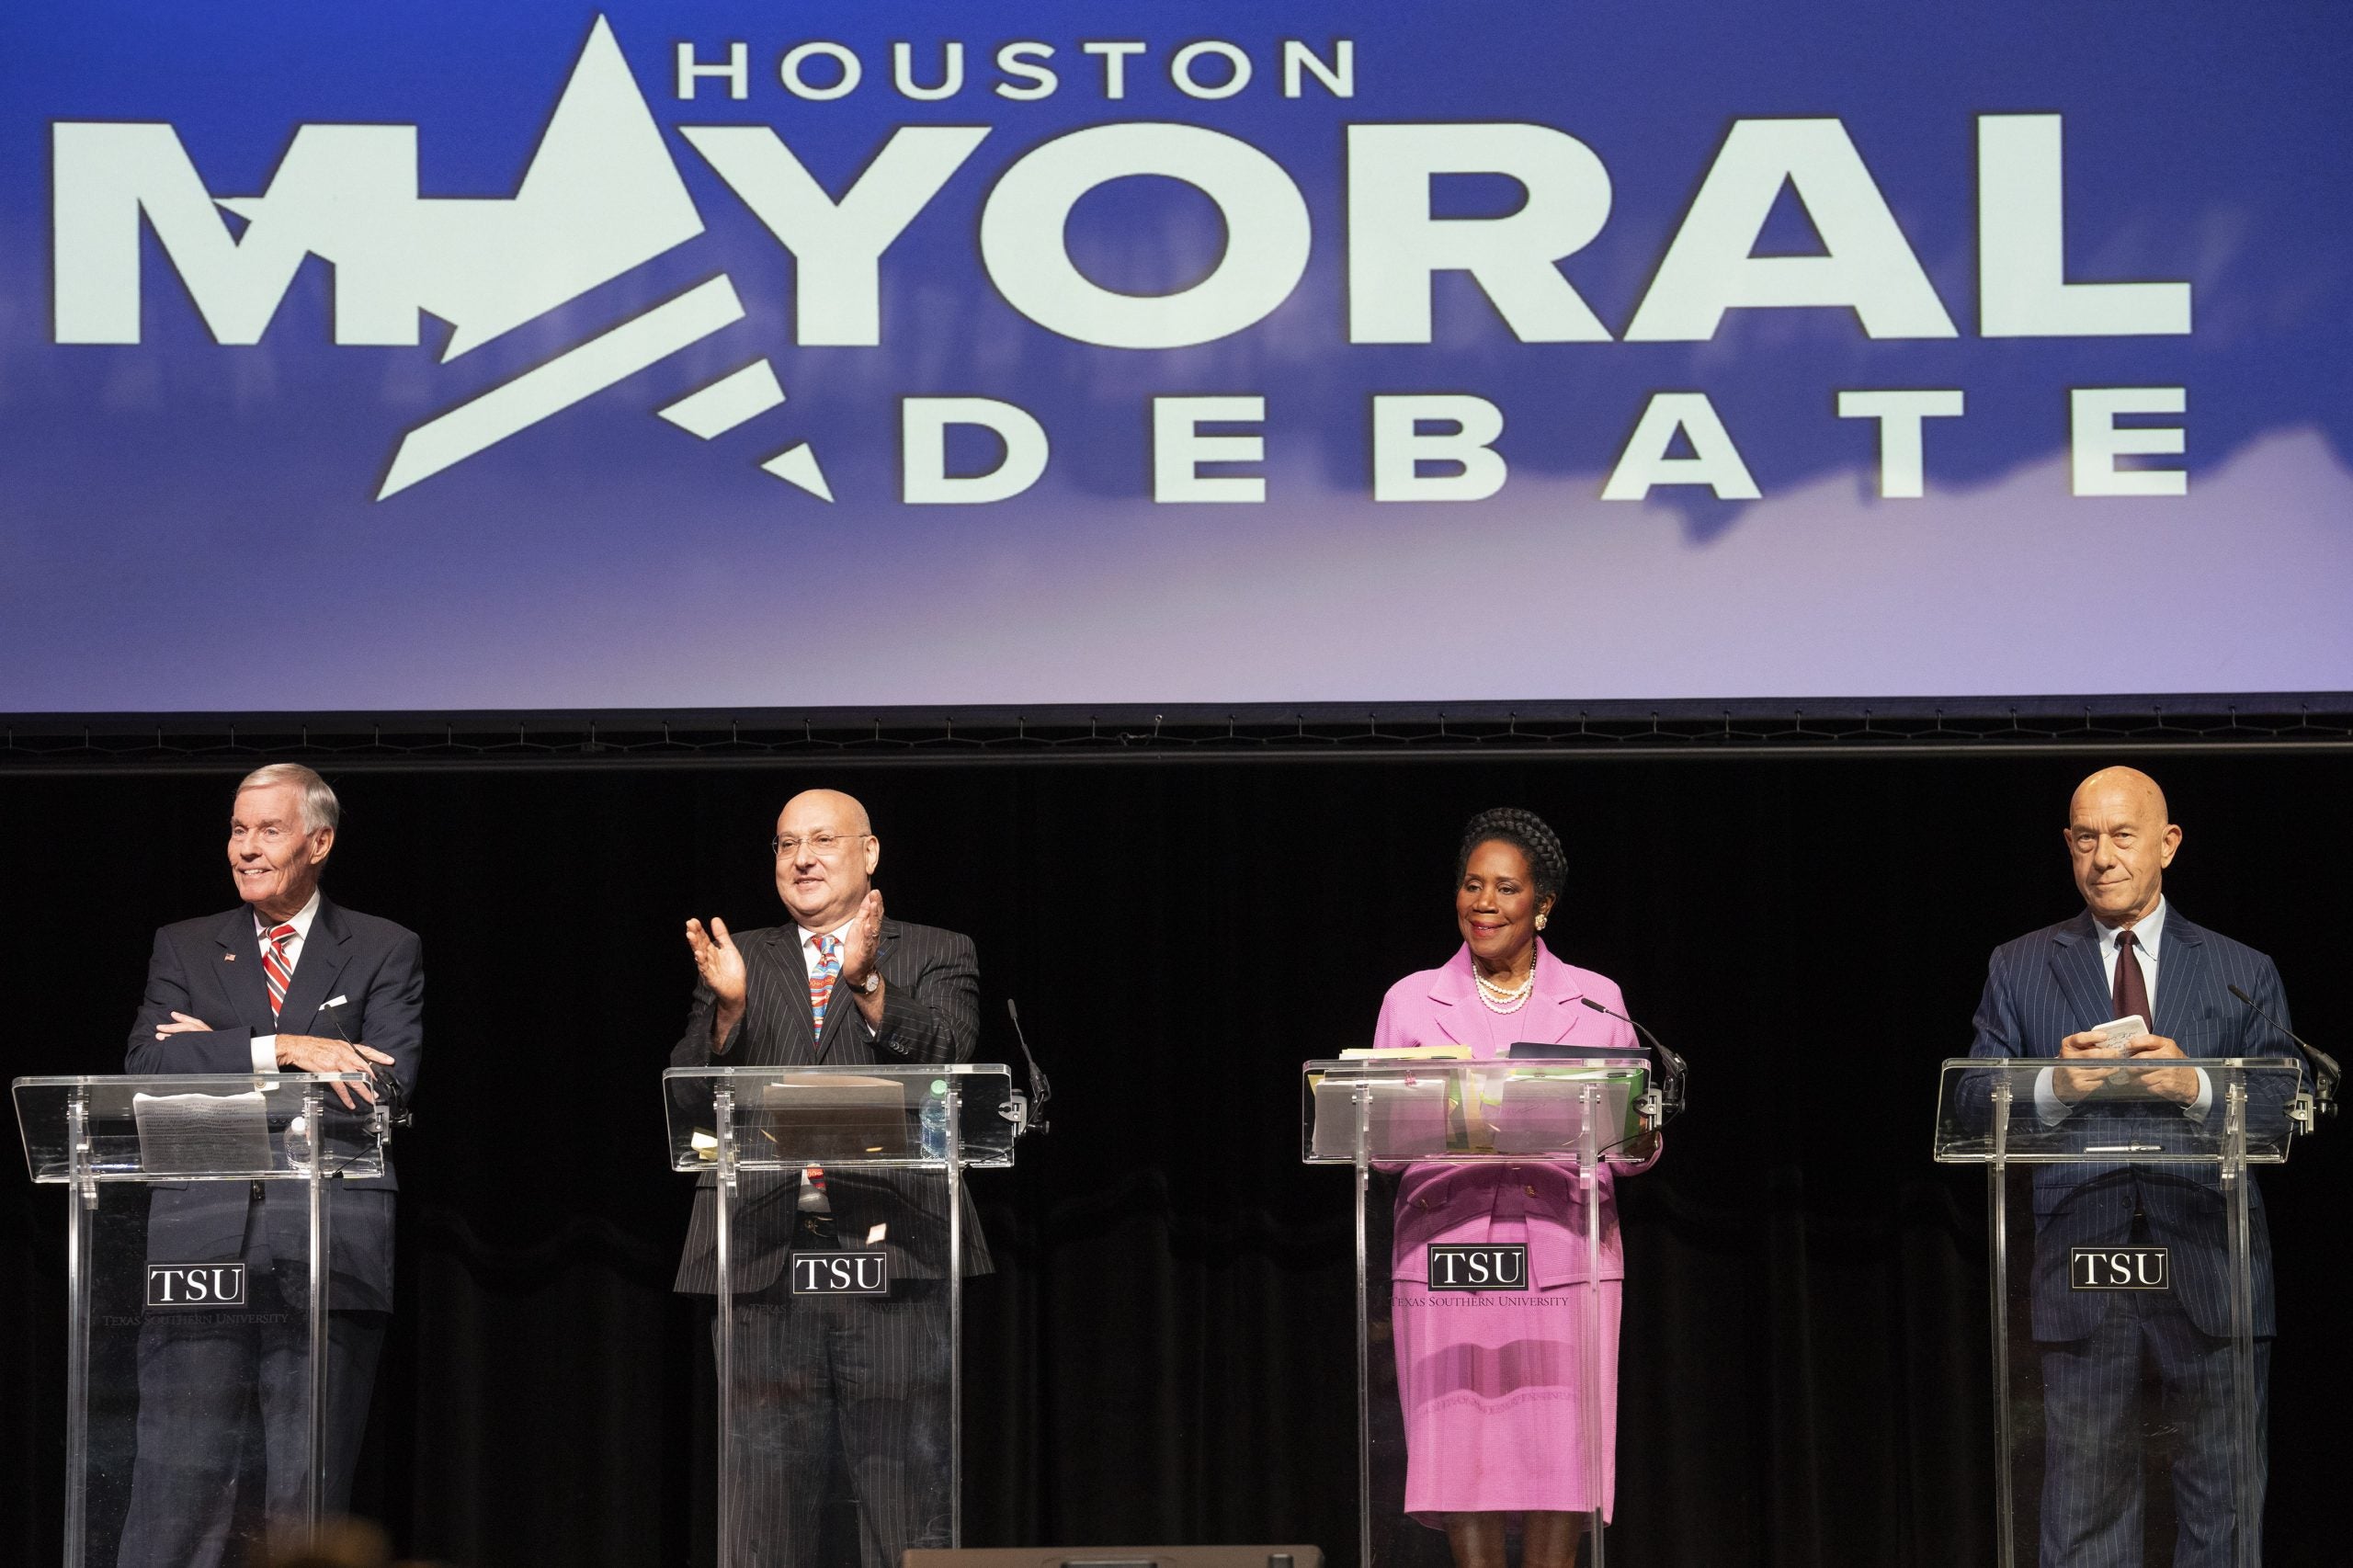 Sheila Jackson Lee Faces A Runoff Election To Become The Next Mayor Of Houston